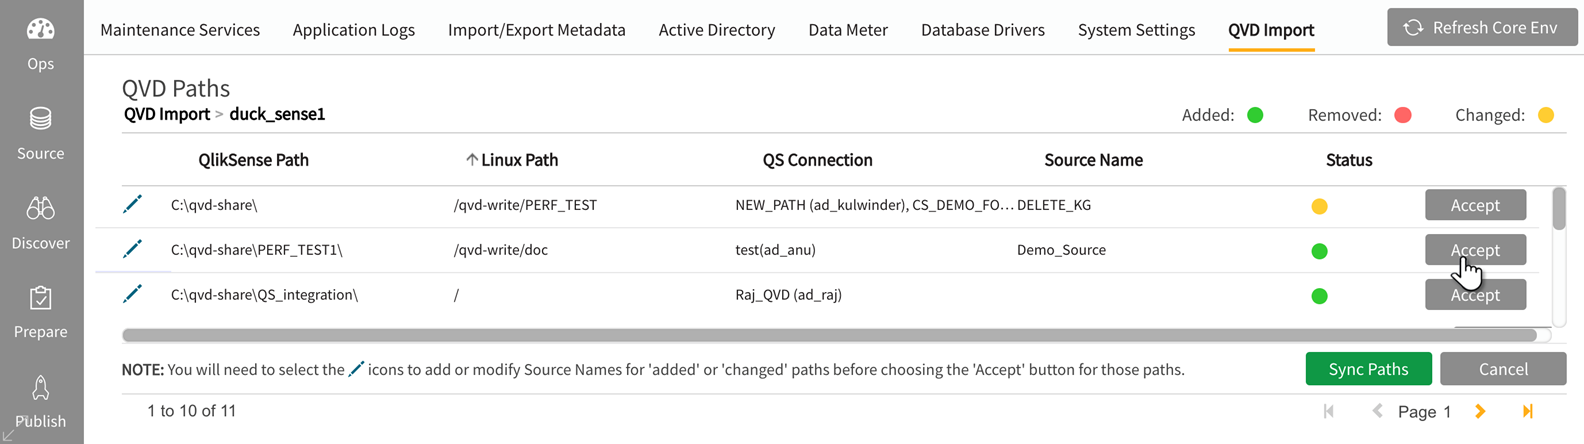 Select Accept to the right of each path entry to persist the connector path and QVD metadata